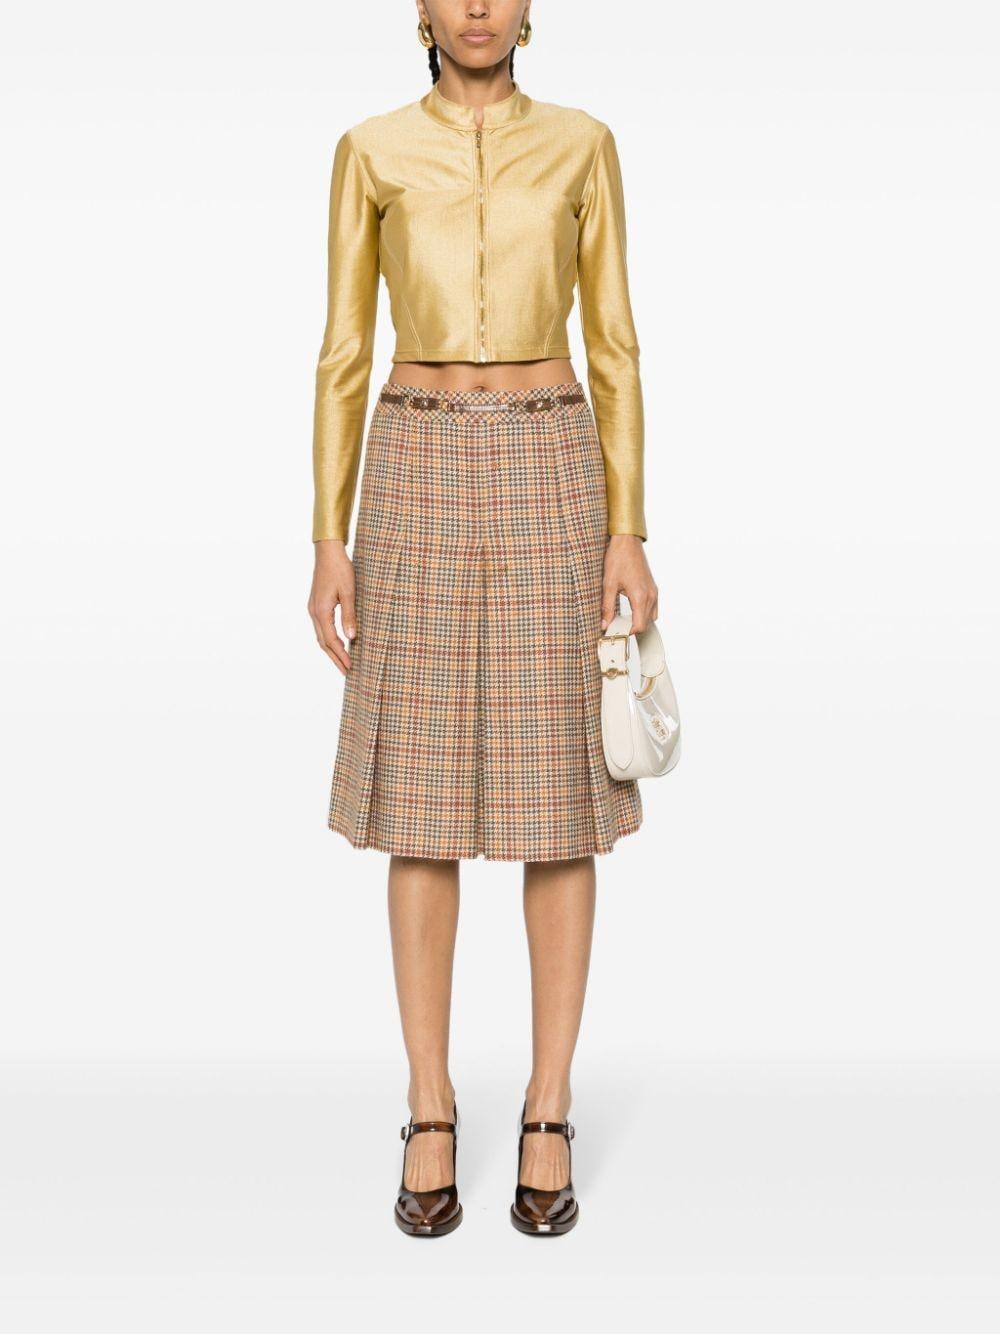  Chanel Gold-Tone Metallic Cropped Jacket In Good Condition For Sale In Paris, FR